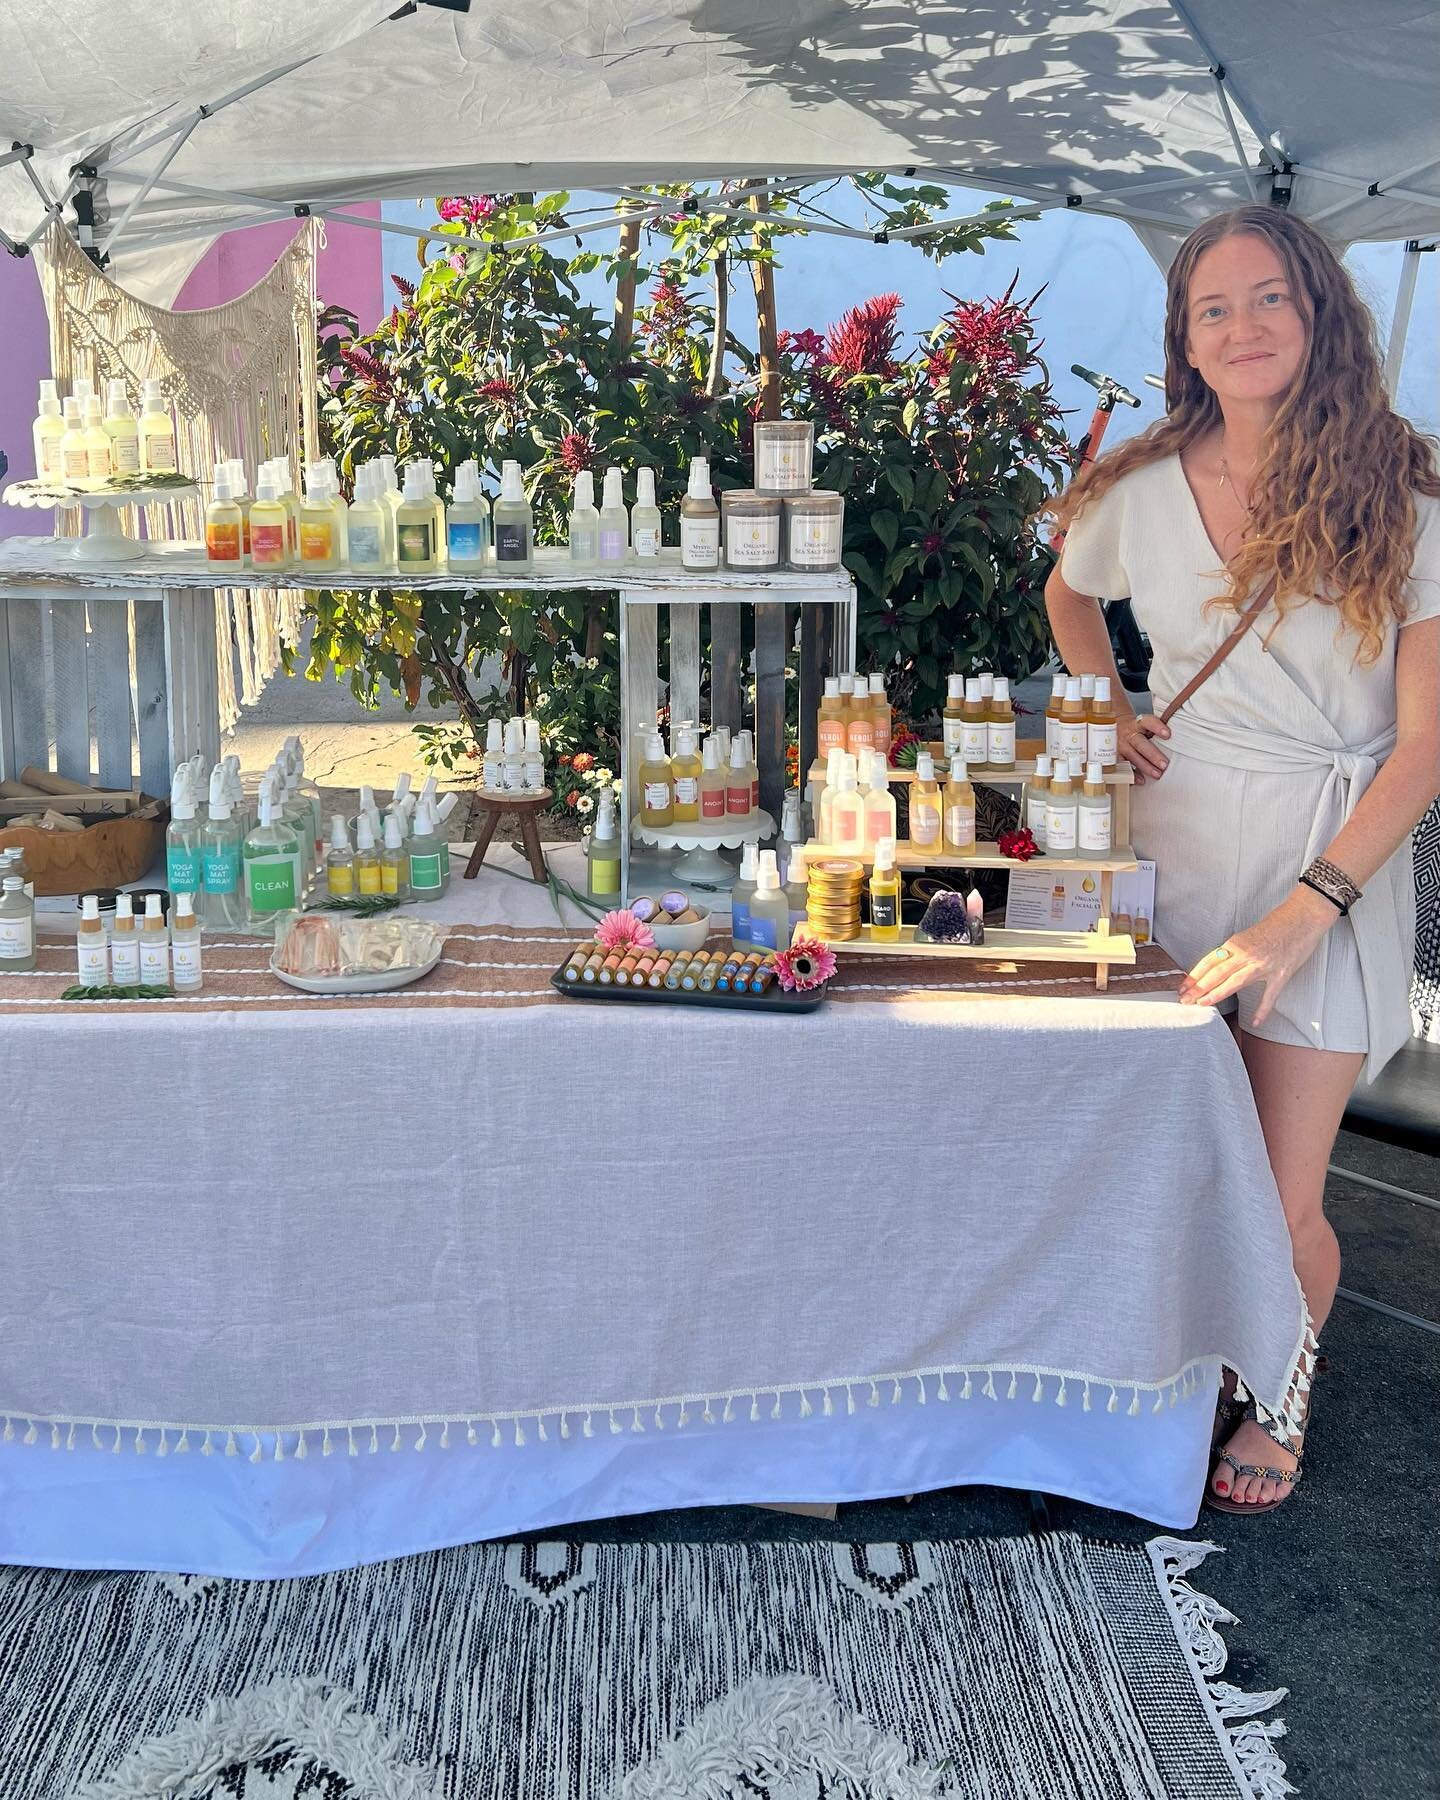 We&rsquo;re popping up on Thursdays at the North Park Farmers Market!  3-7:30pm every Thursday.  Come and get your aromatherapy products! 
.
.
.
#shoplocal #supportsmallbusiness #aromatherapy #organicproducts #quinntessentials #roomandbodysprays #nor